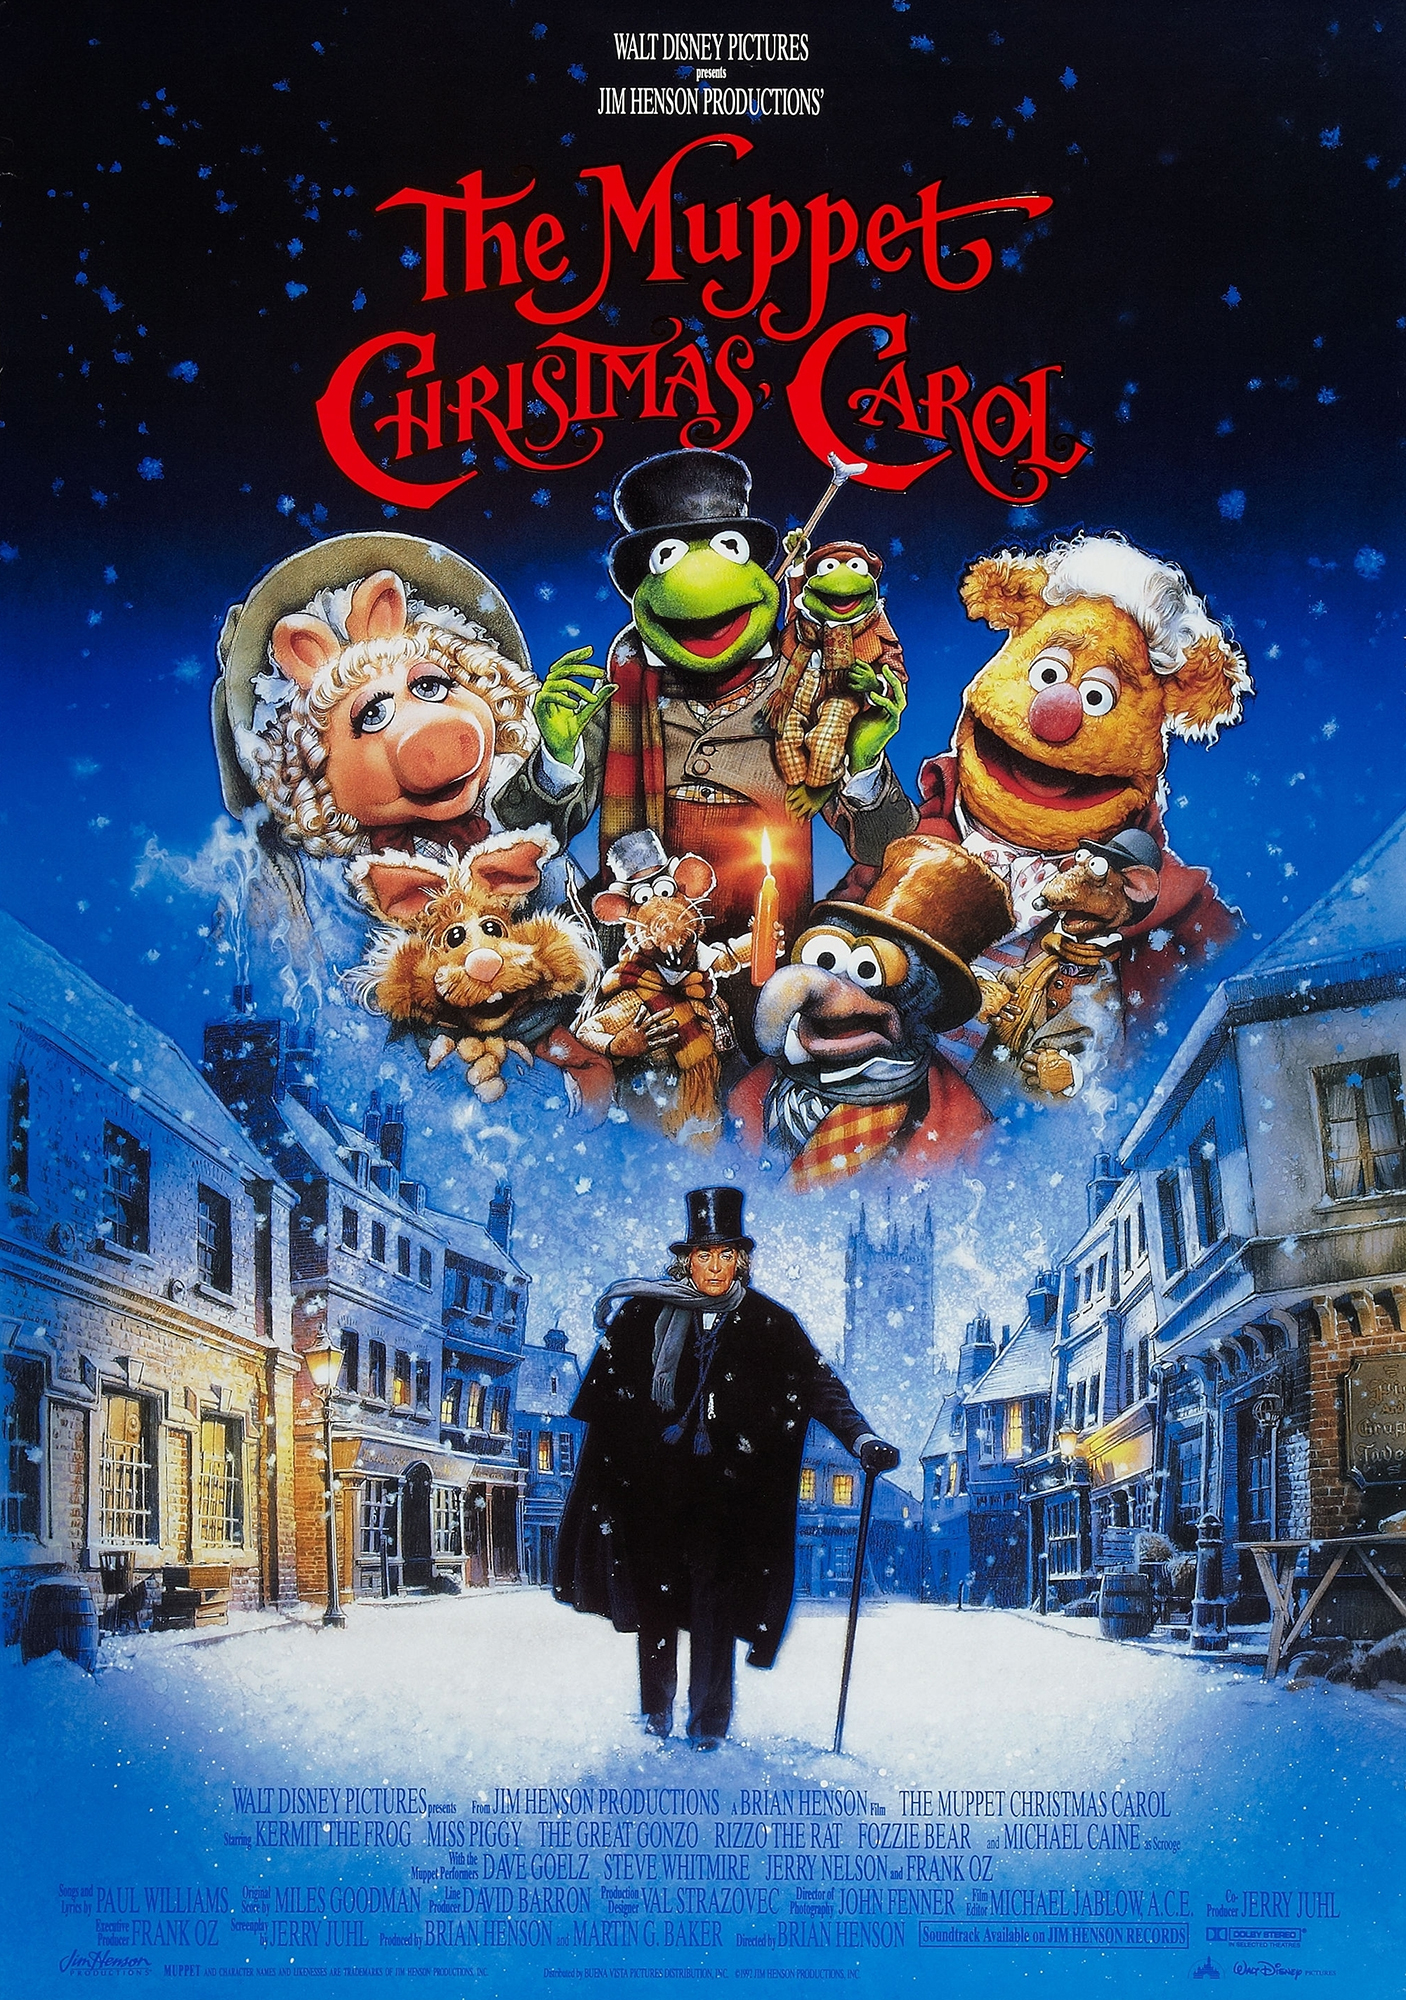 The most awesome list of 20 best Christmas movies ever! 